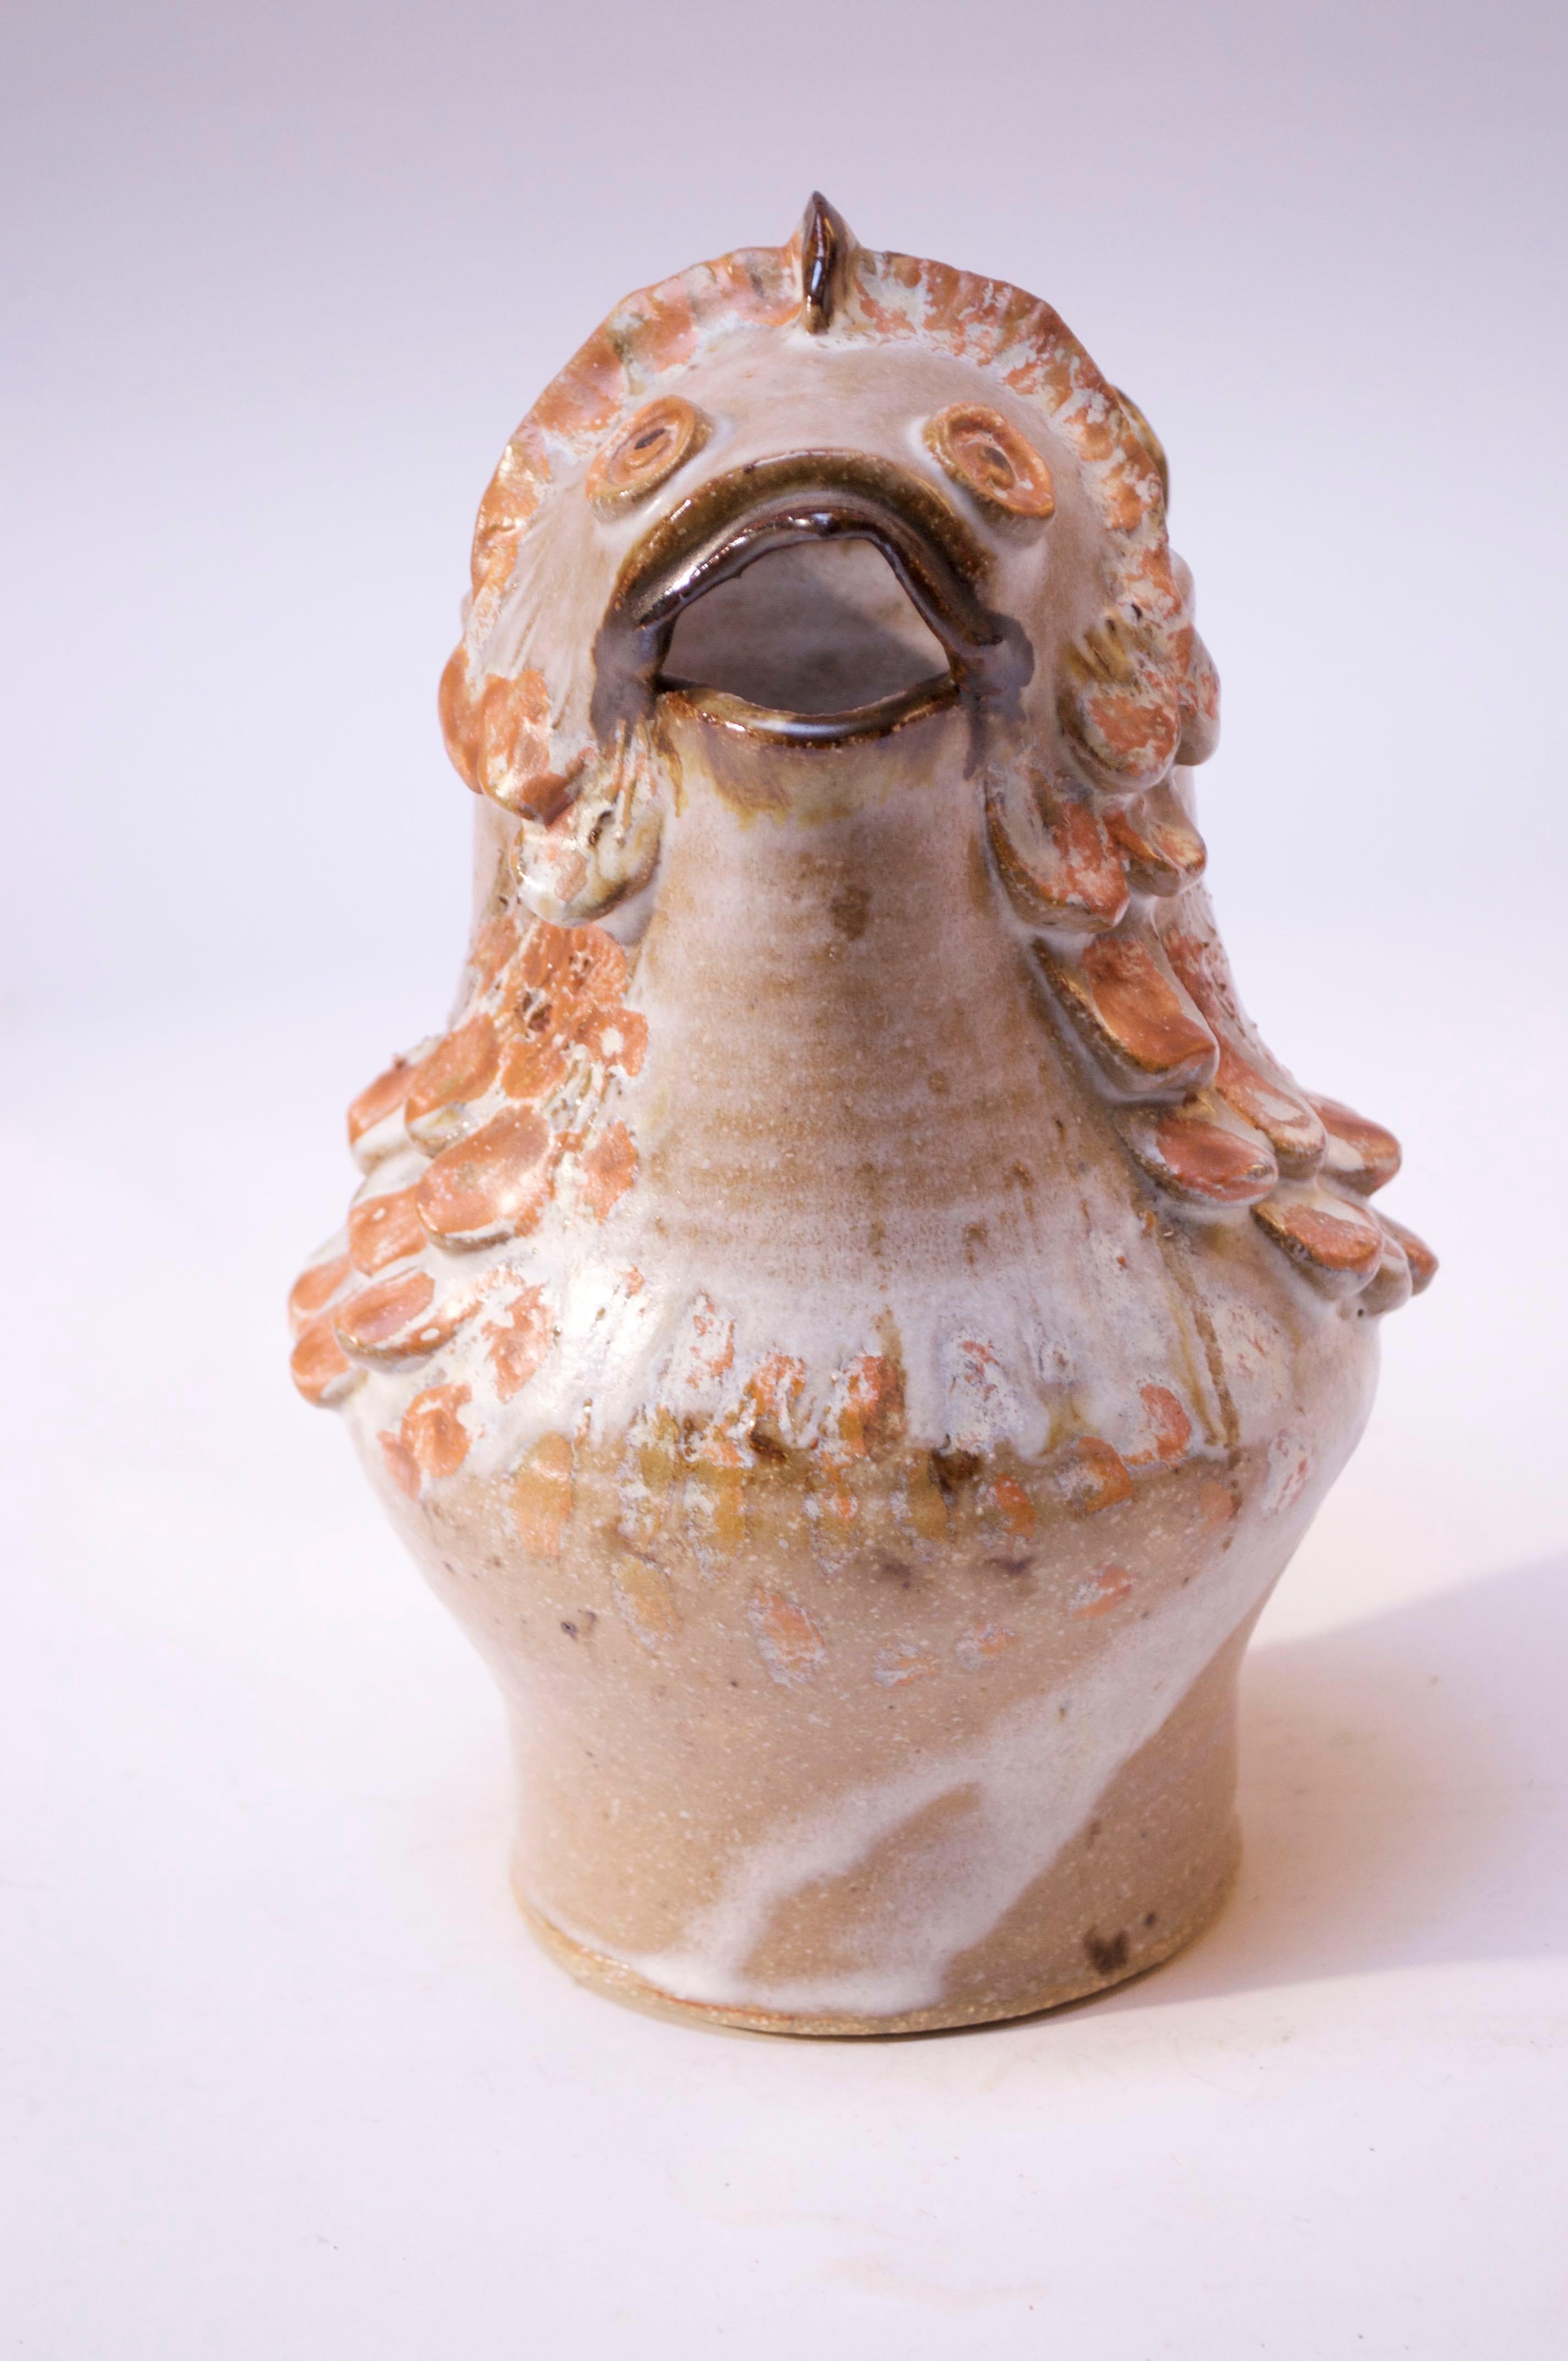 Art pottery fish pitcher in attractive palette of beige, peach, brown, tan, and white. Heavily textured scale decoration throughout, 'frosted' with a dense white glaze. Signed 'Rush 76' tot the underside.